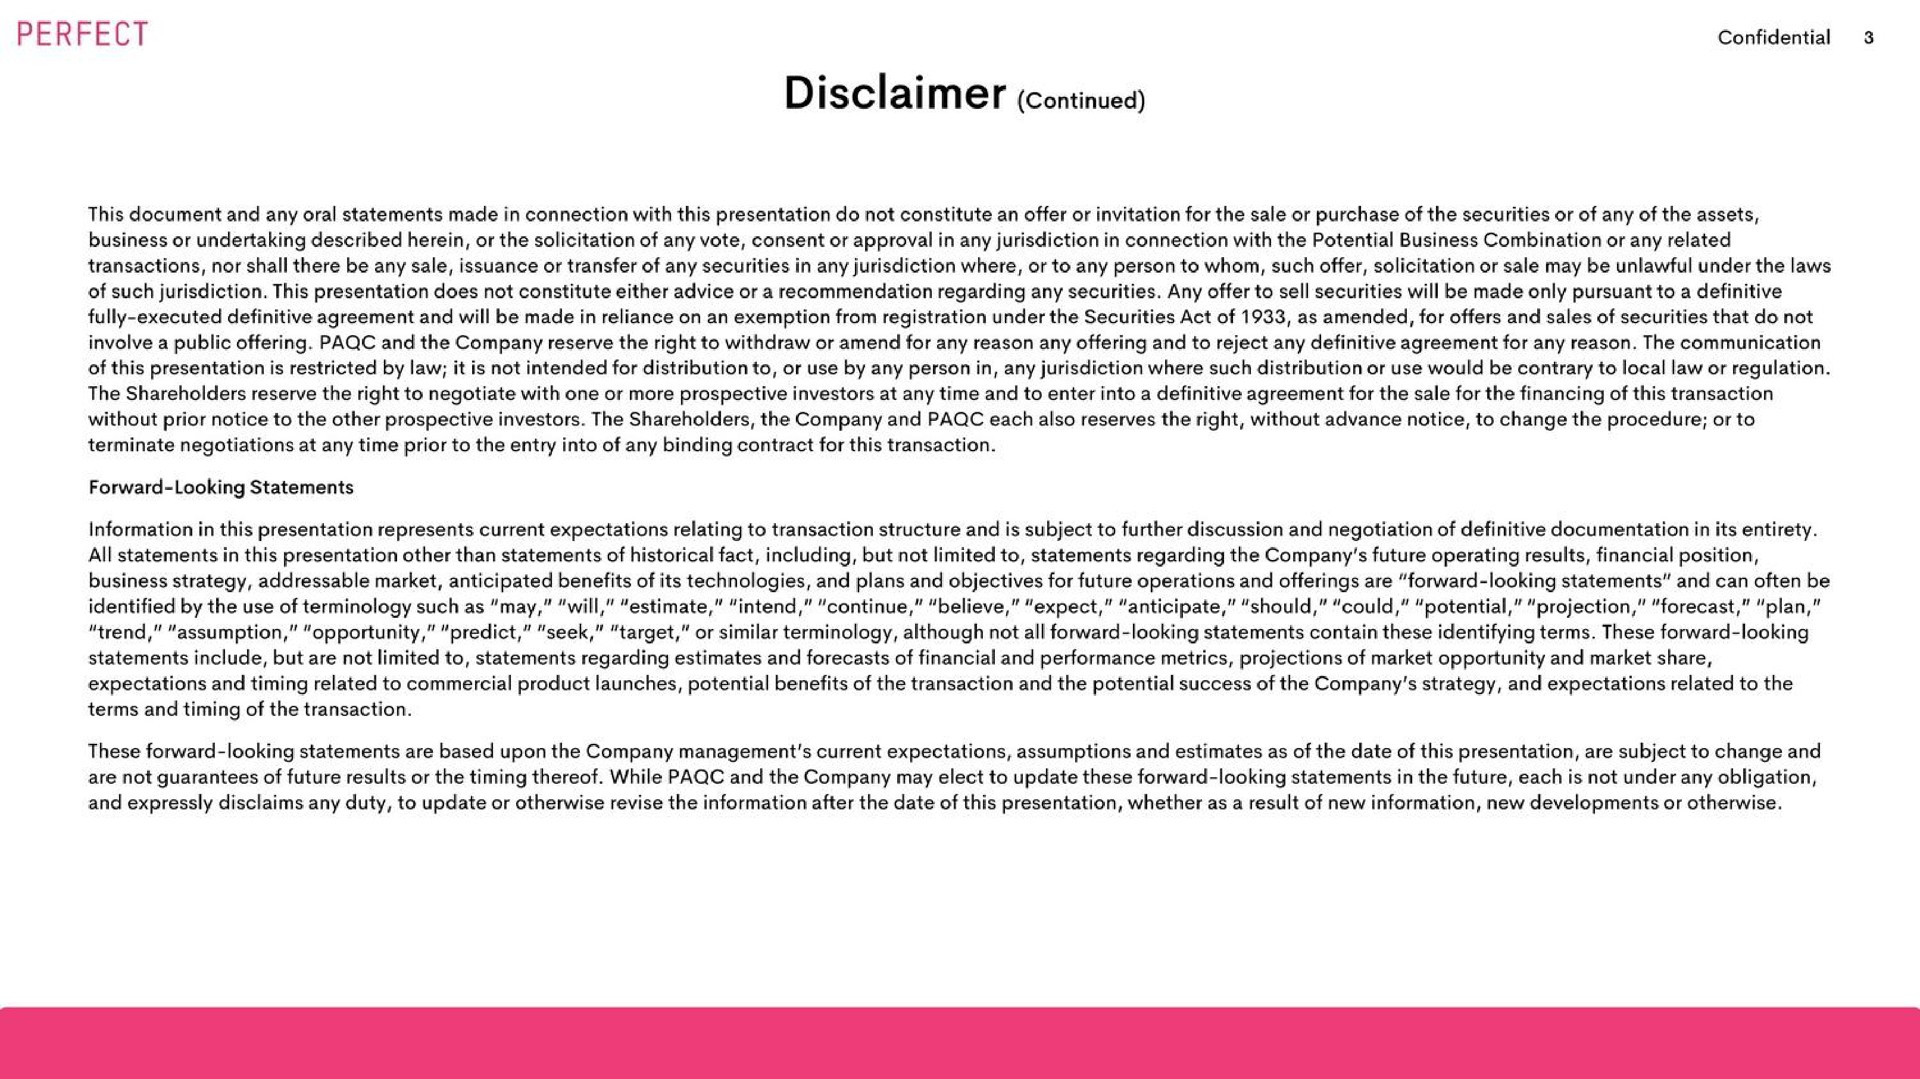 disclaimer continued | Perfect